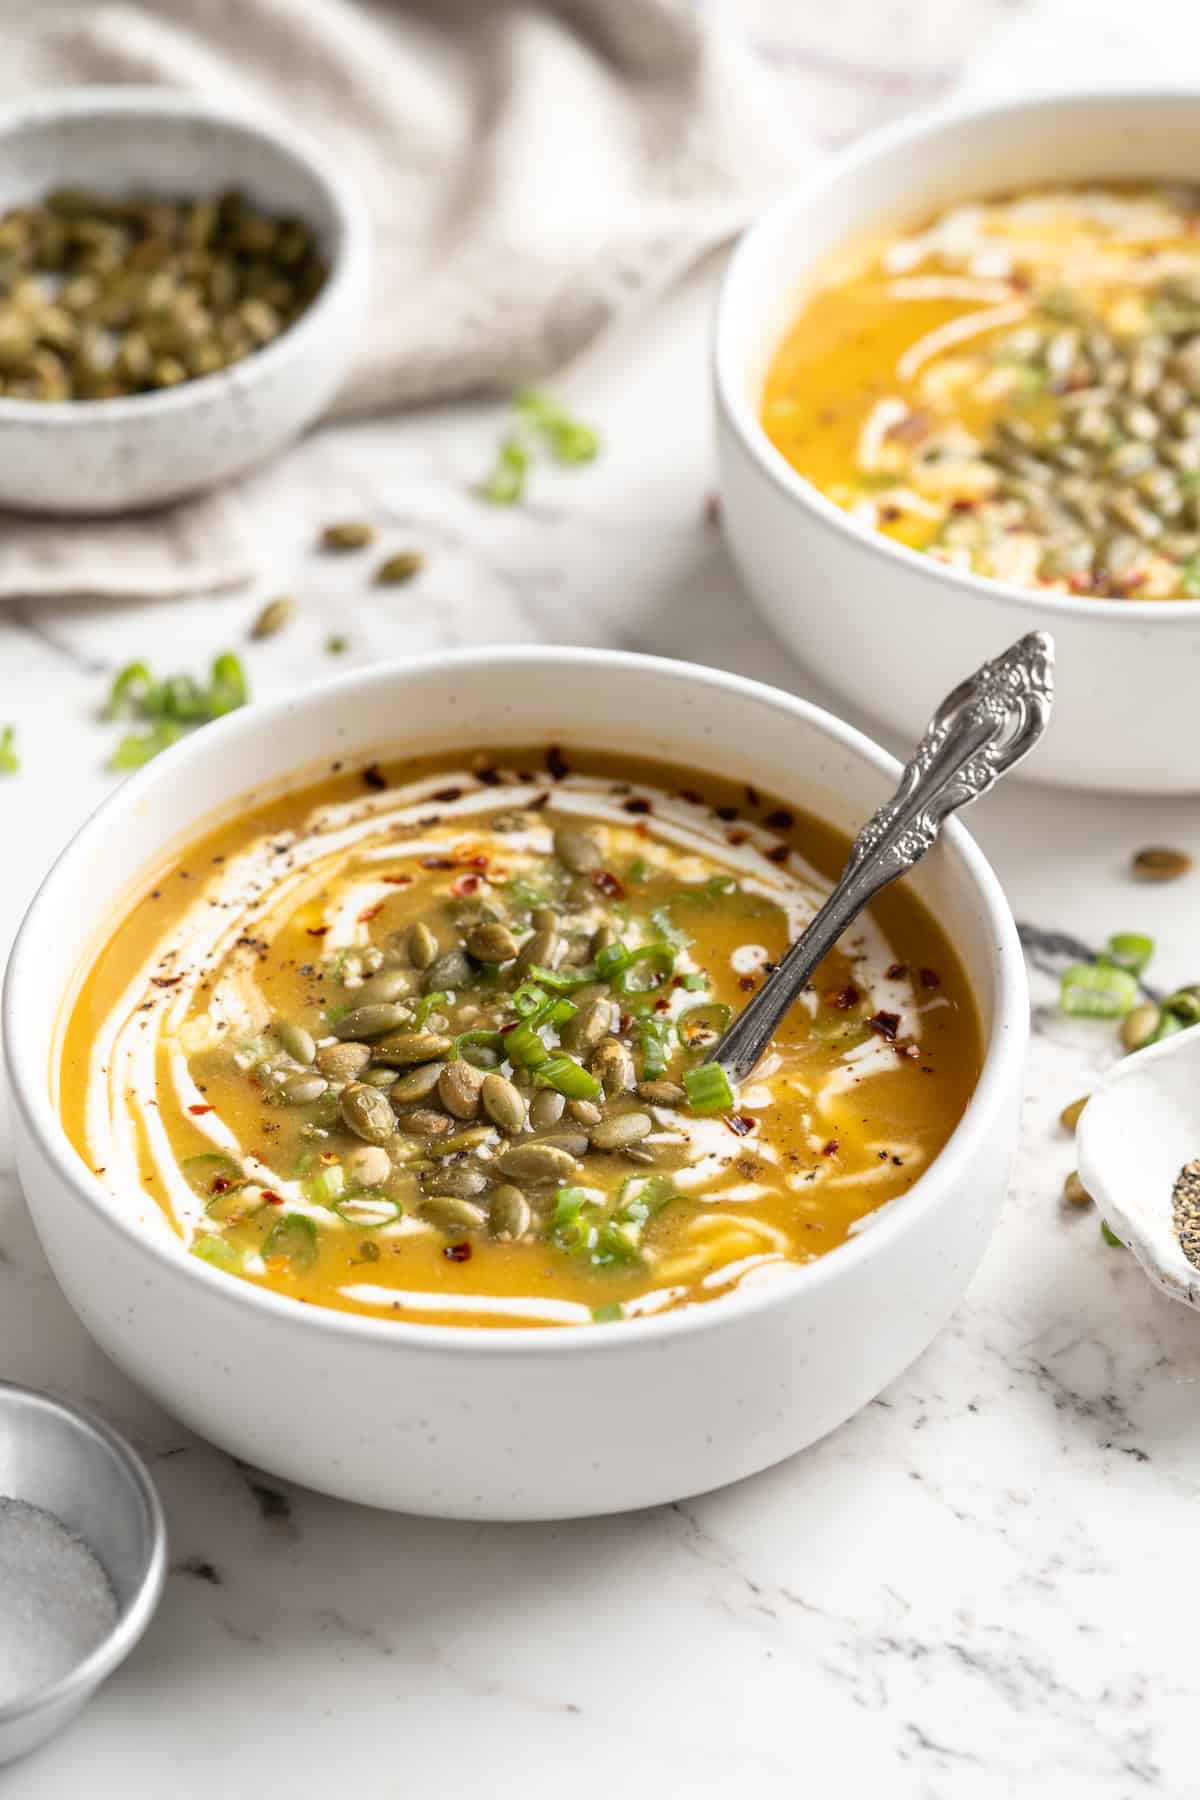 Creamy pumpkin soup in white bowls with pepitas, green onions, and coconut cream garnish